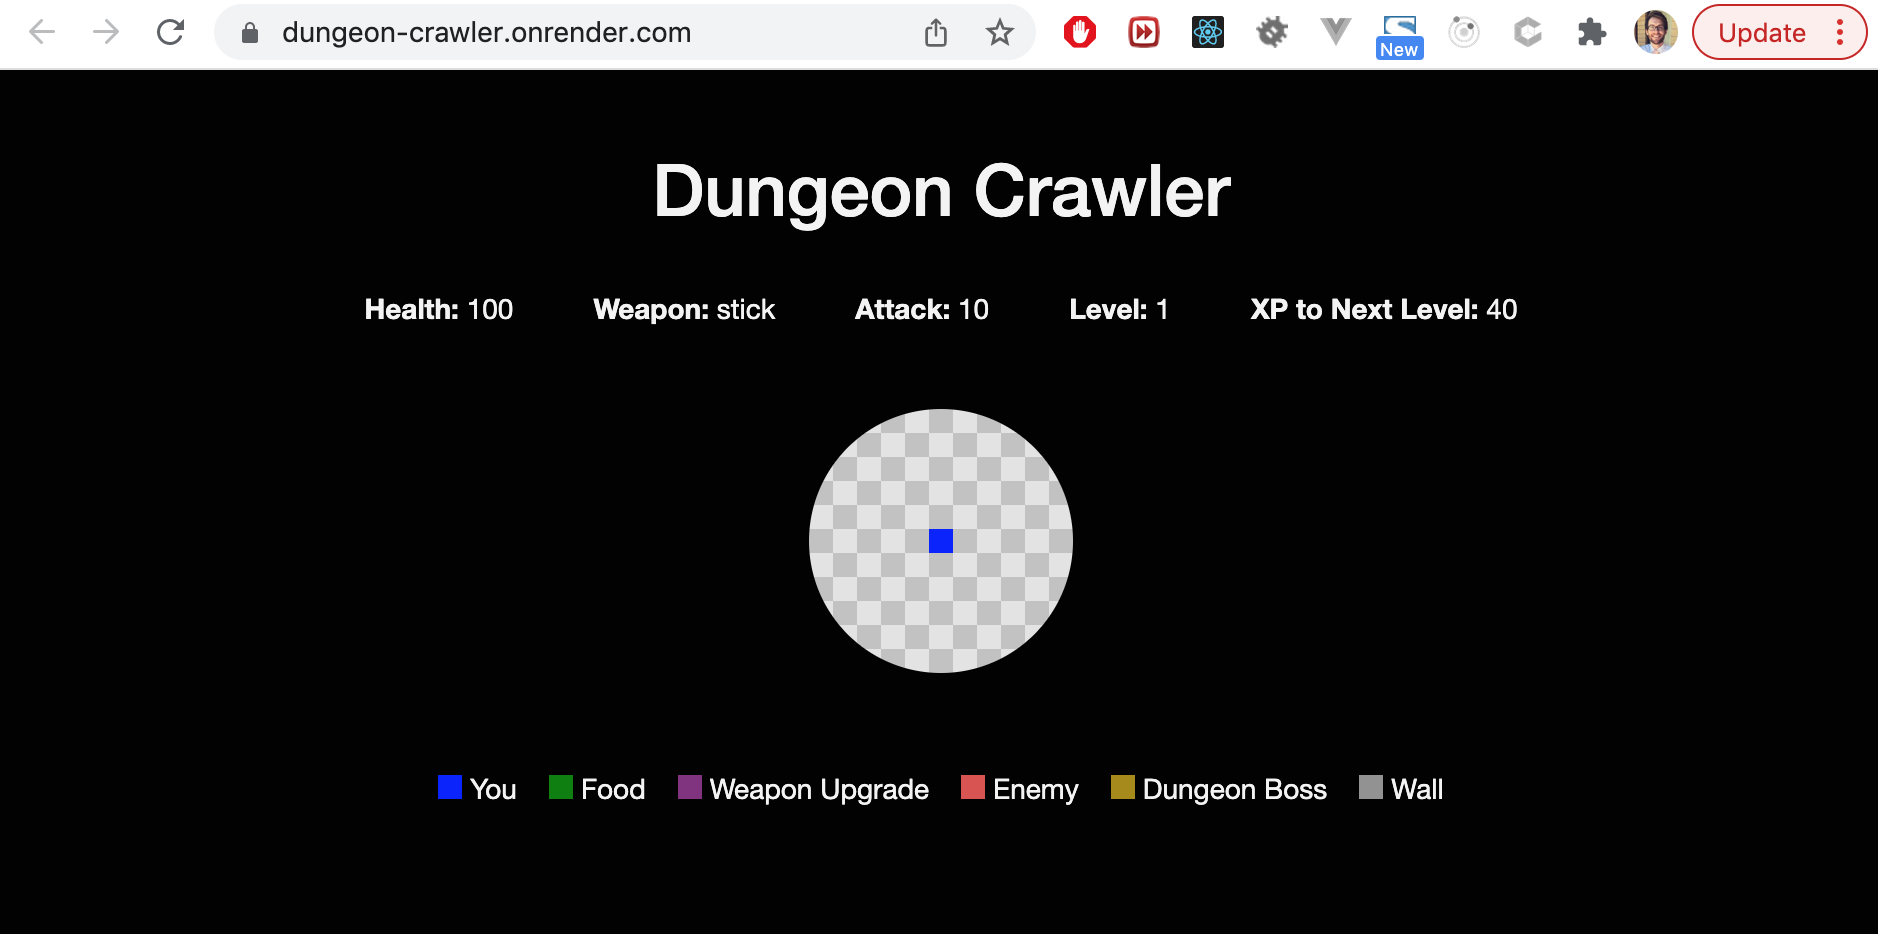 Dungeon crawler app hosted on Render